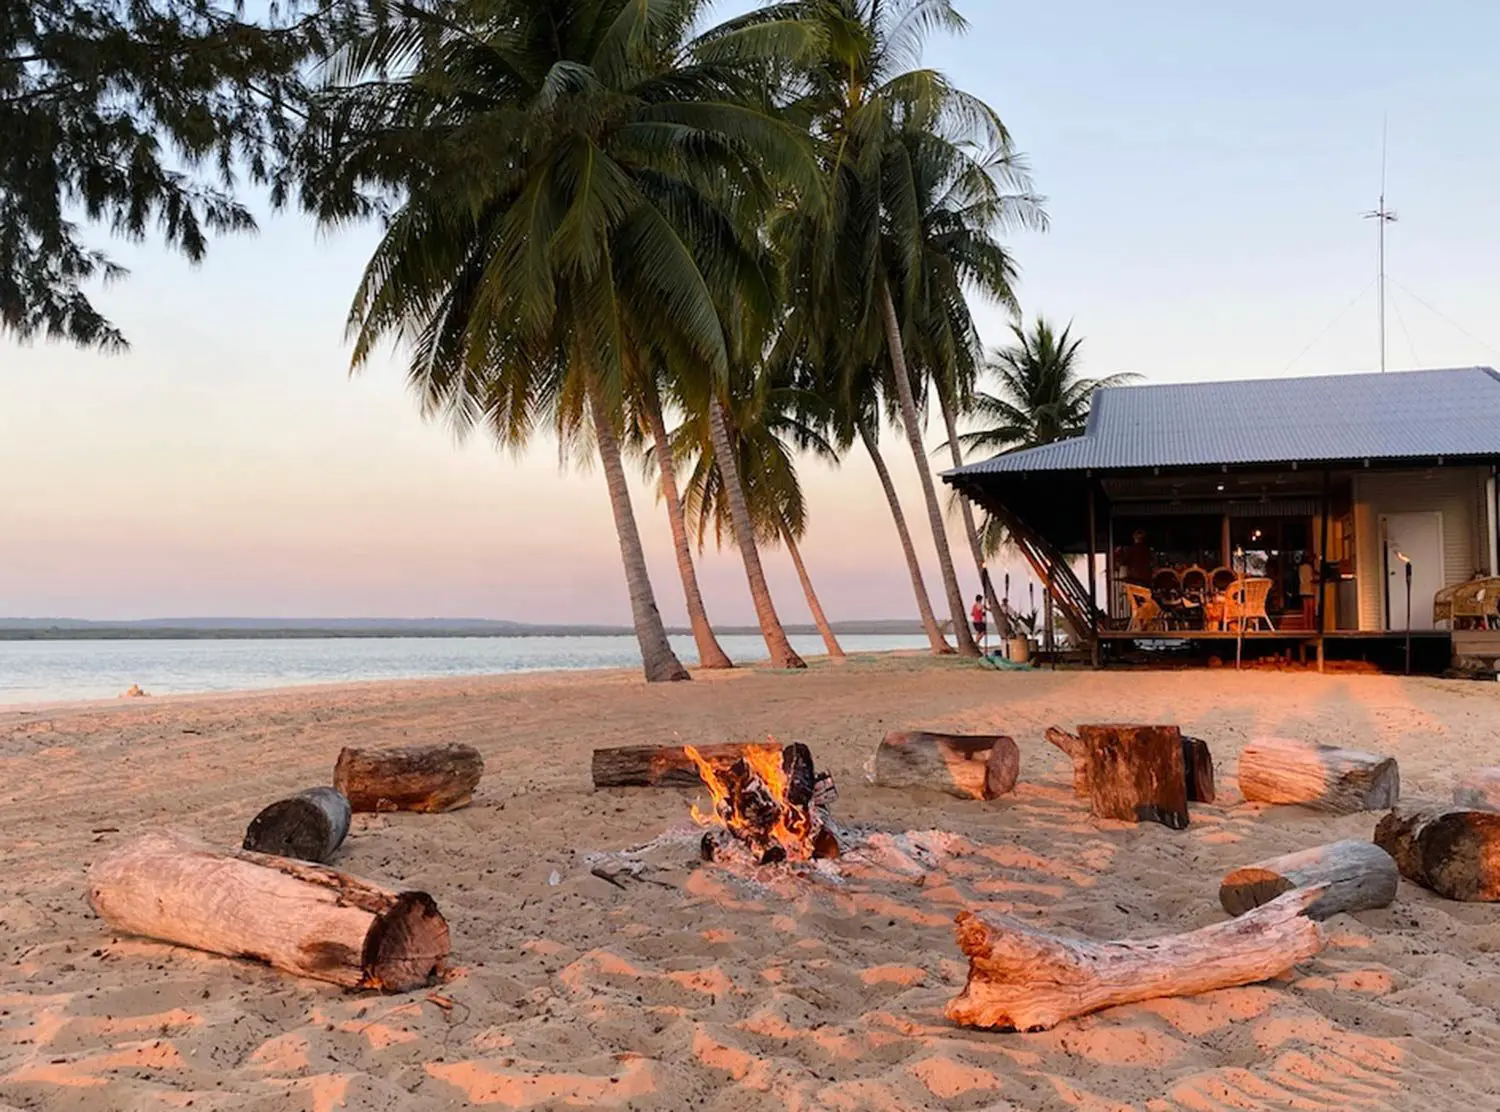 Tiwi Island Retreat Dreamy colored skies and beach bonfires. I loved sharing a drink with other guests at the extraordinary sunsets here